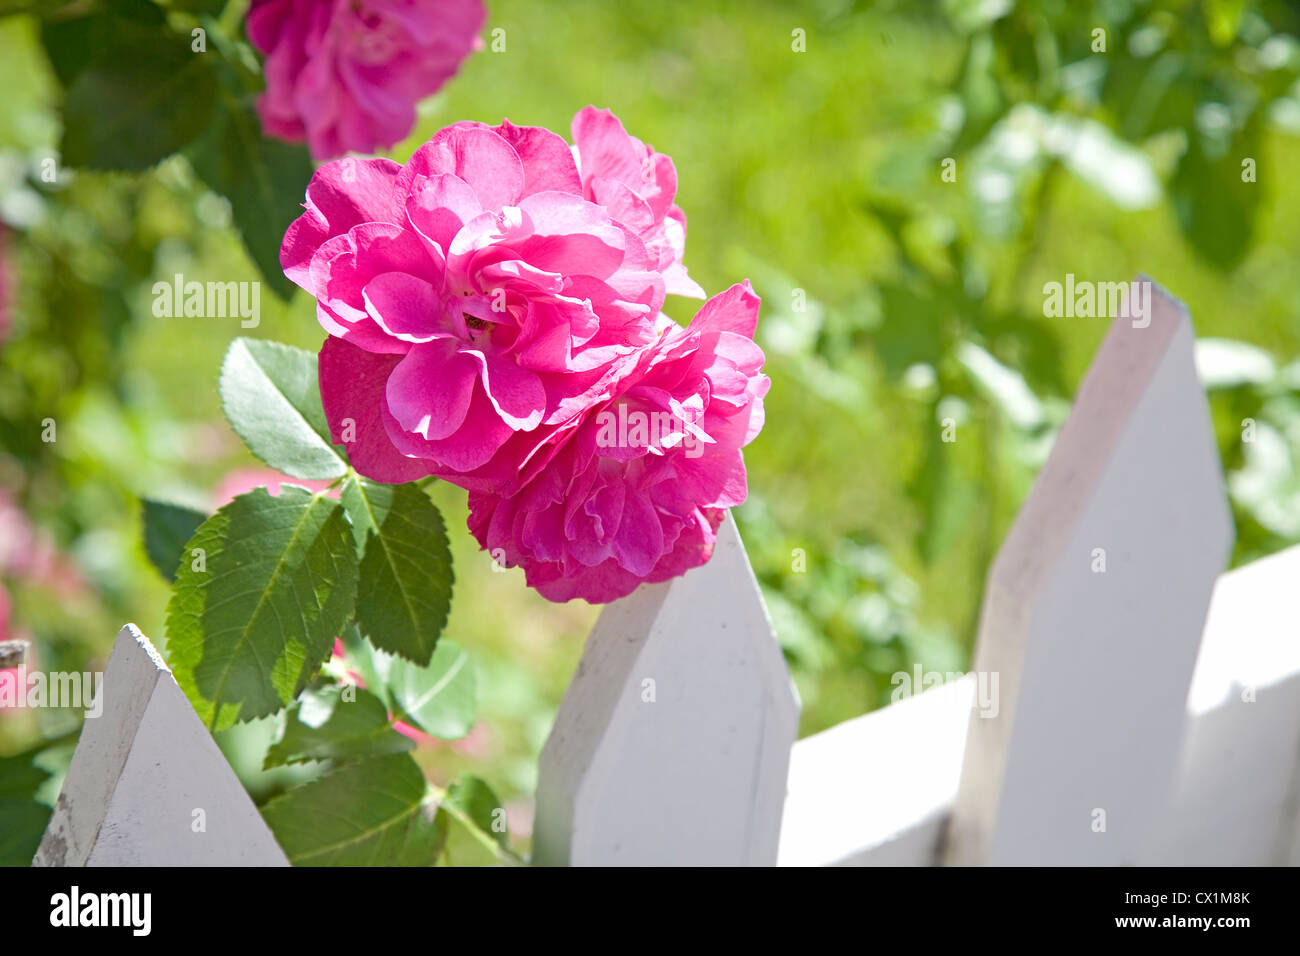 Old fashioned garden rose and a white picket fence in a summer garden. Stock Photo